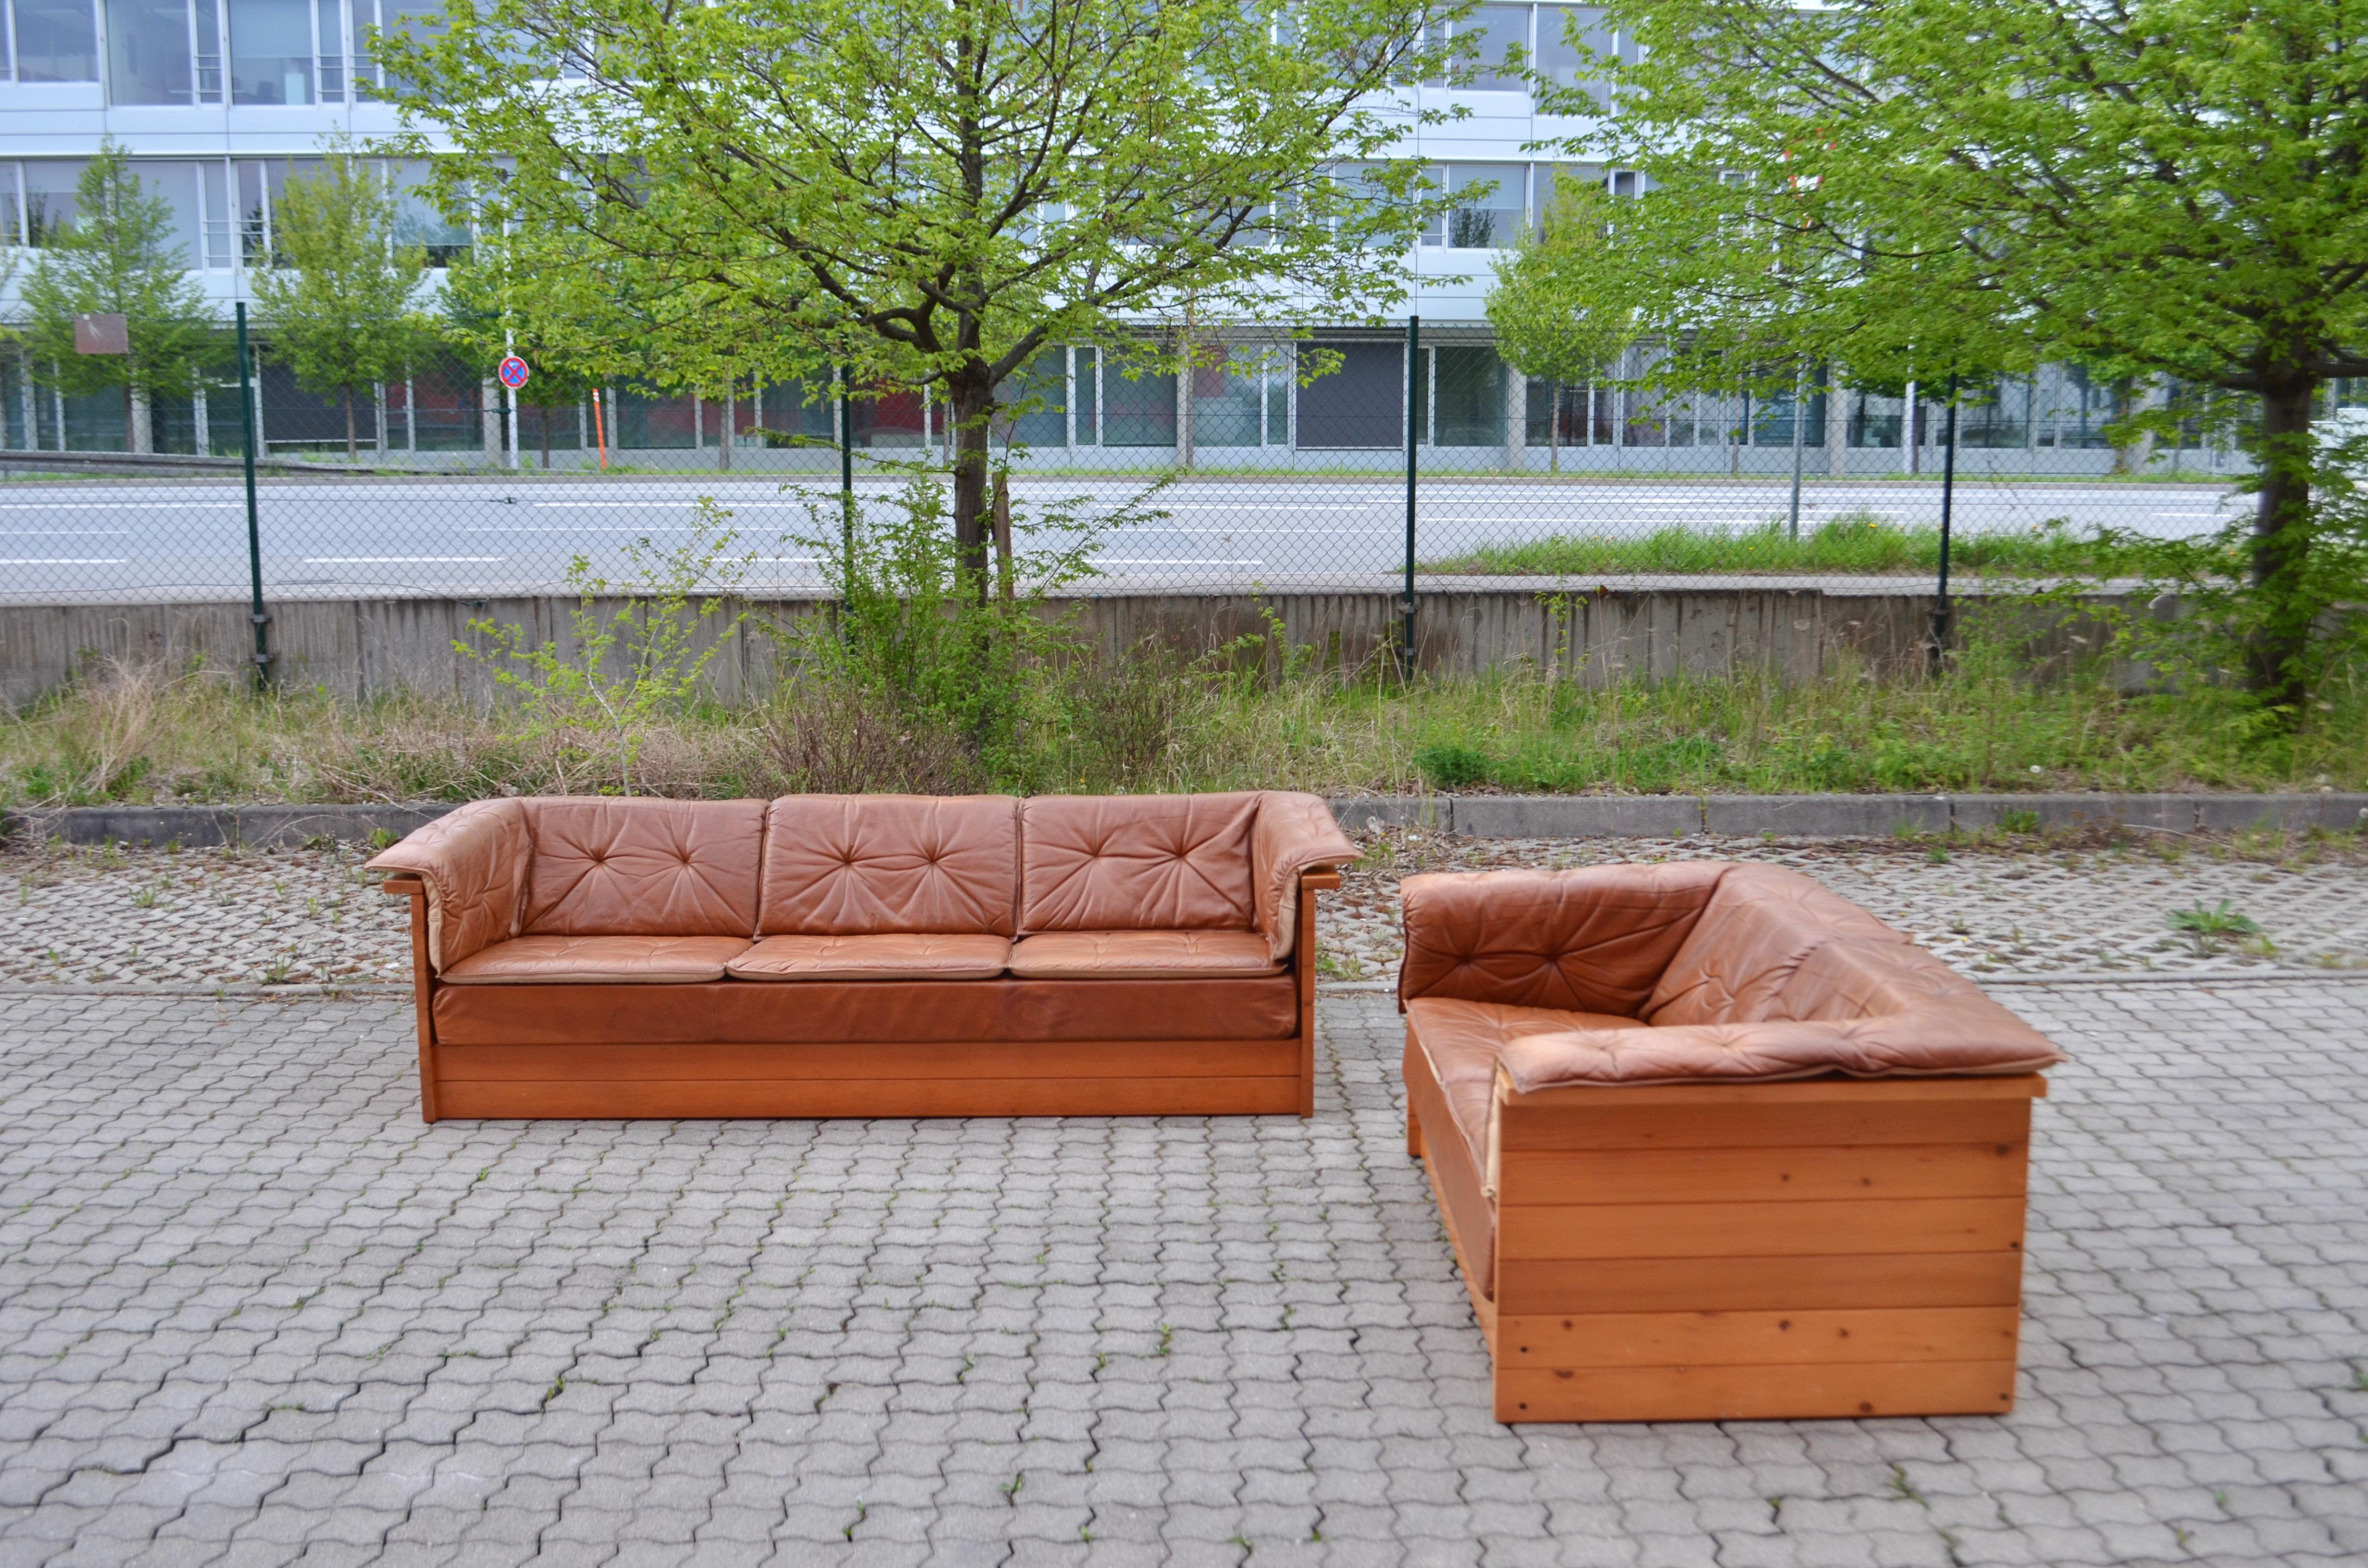 This minimalist sofa ensemble was manufactured in Scandinavia Sweden.
it contents a 3 seater Sofa and a 2 seater Sofa.
It has a beautiful solid scandinavian pine frame.
All details are minimalistic and pure.
The loose cushions are made like pads